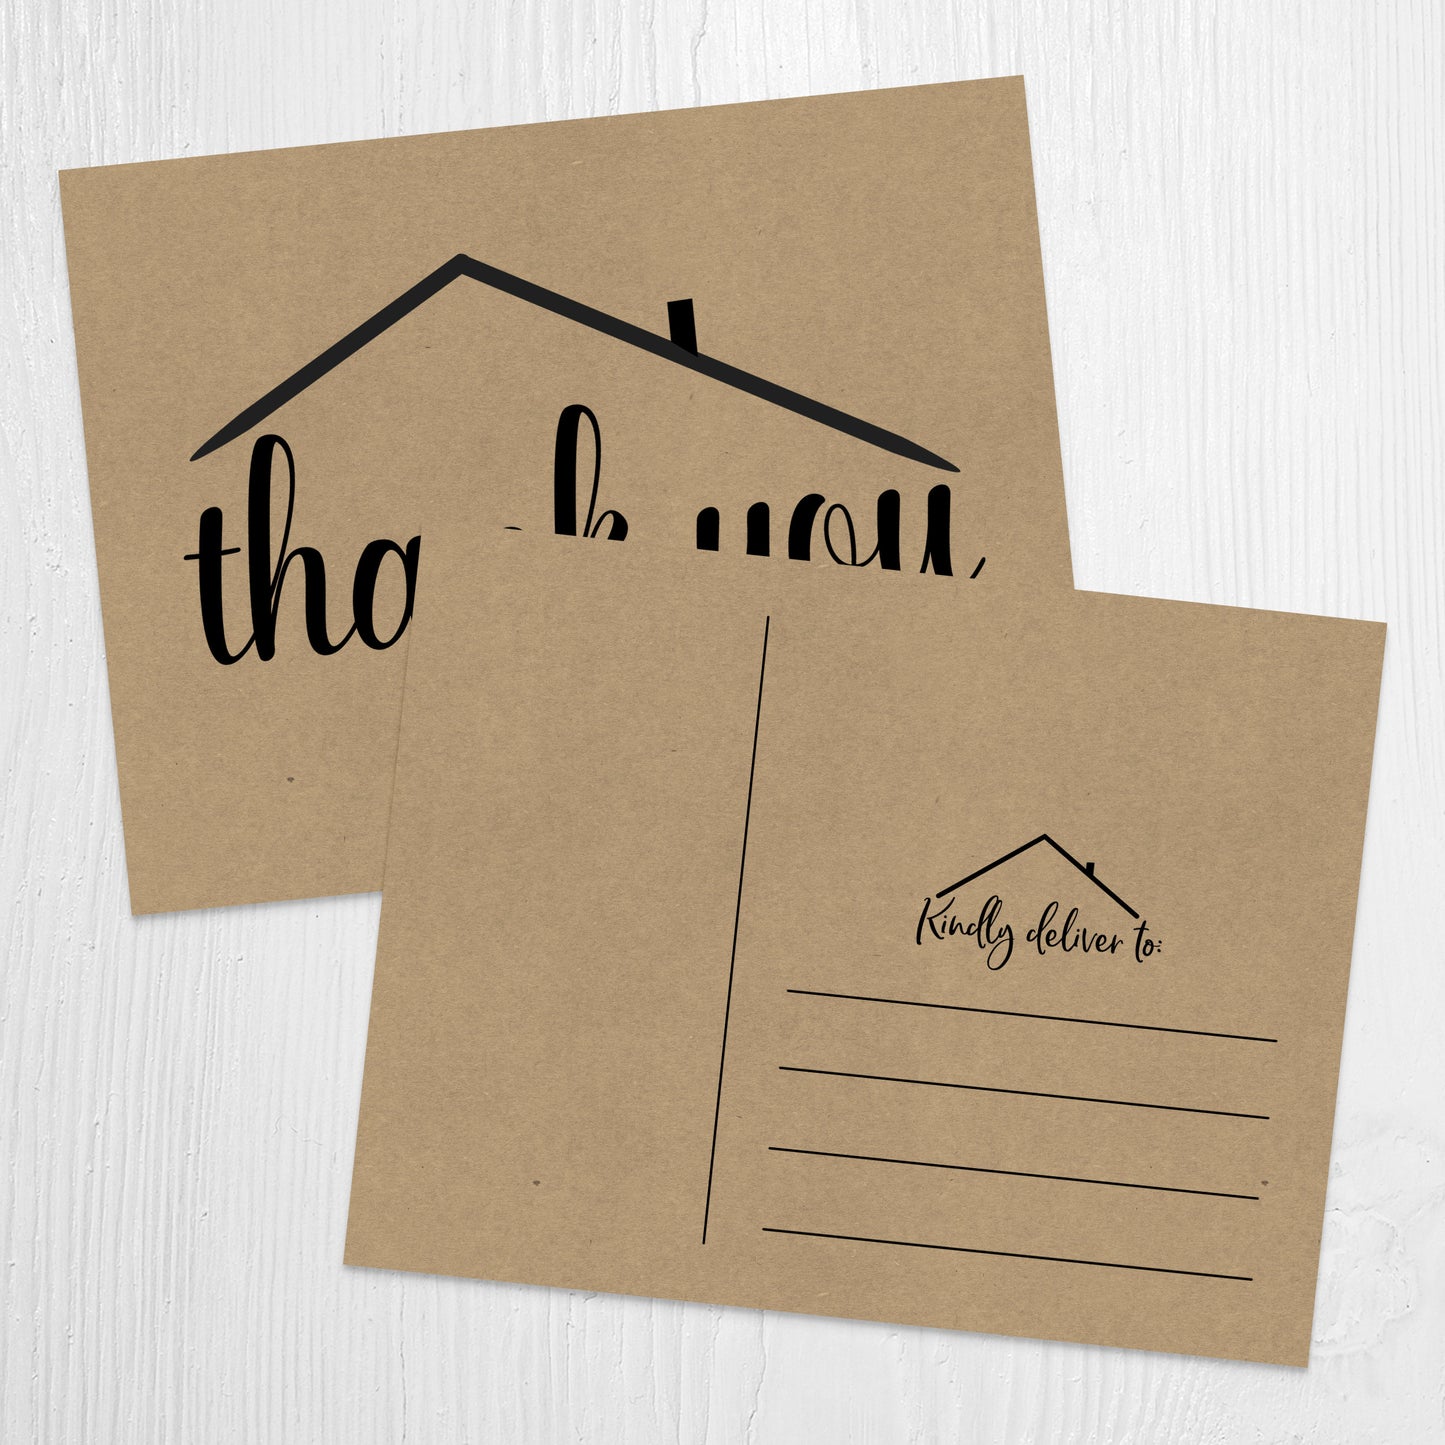 Real Estate Postcard, Thank You Cards, Greeting Cards, Real Estate Cards, Realtor, Handmade Cards, Real Estate, Thank You Postcard